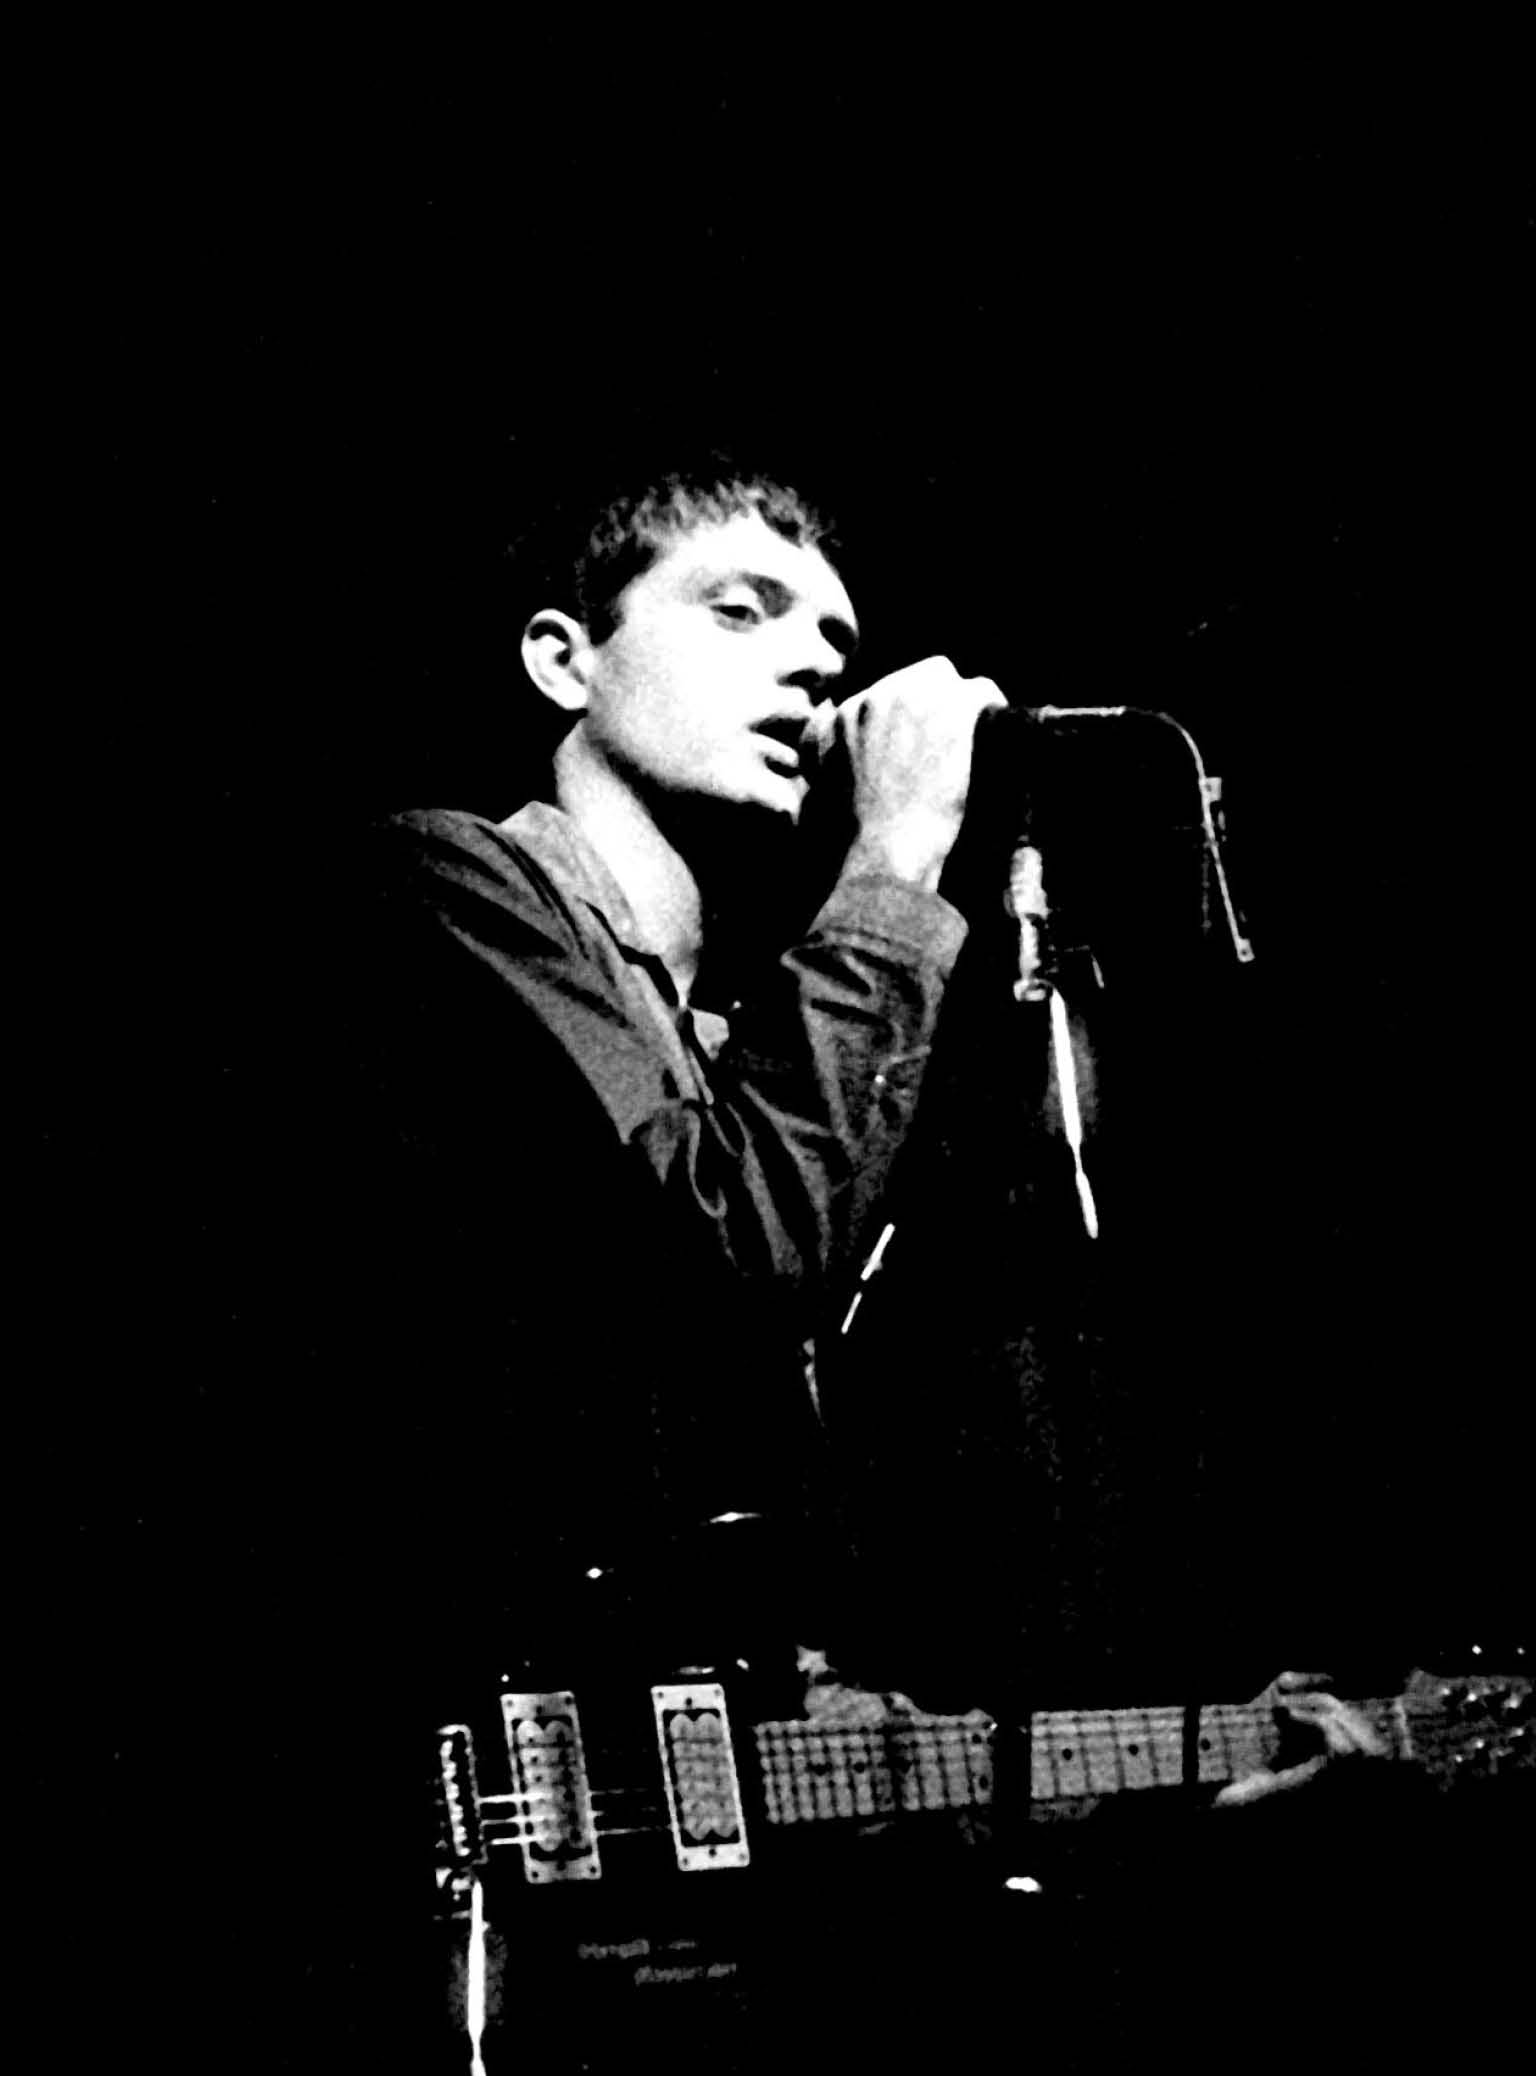 On May 18th May 2010 will be the 30th Anniversary of Ian Curtis's death. Ian Curtis and Joy Division performing live at The Electric Ballroom in London on 26th October 1979. © . Credit all Uses *Unbylined uses will incur an additional discretionary fee!*, Image: 70571808, License: Rights-managed, Restrictions: , Model Release: no, Credit line: Profimedia, Retna UK